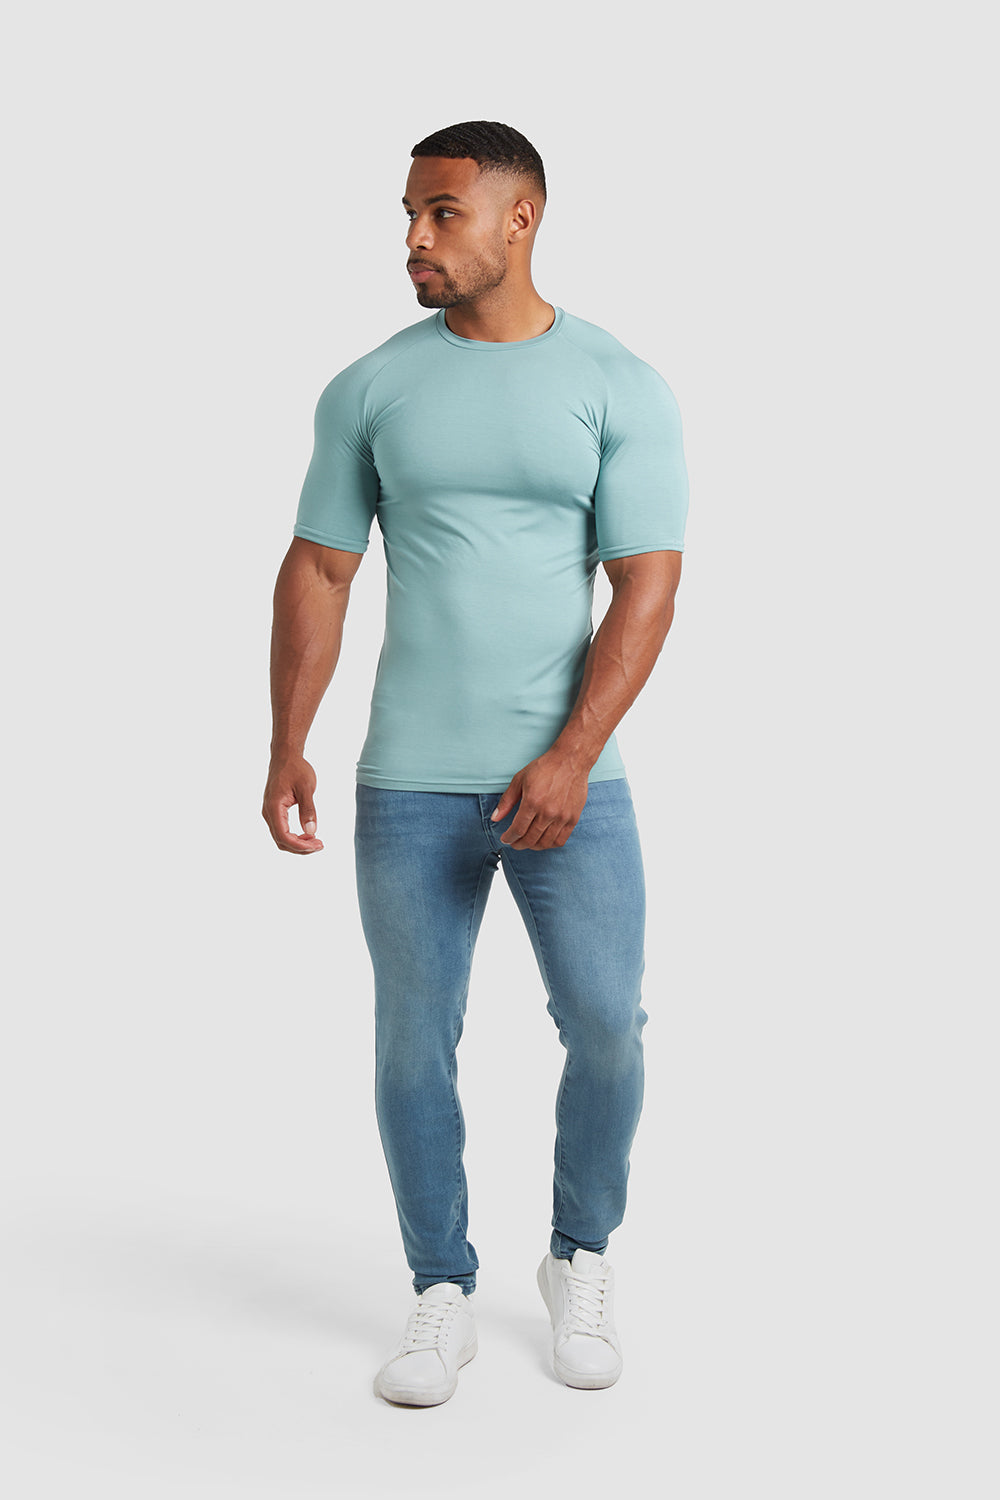 Bamboo Loop Back T-Shirt in Smoked Green - TAILORED ATHLETE - ROW